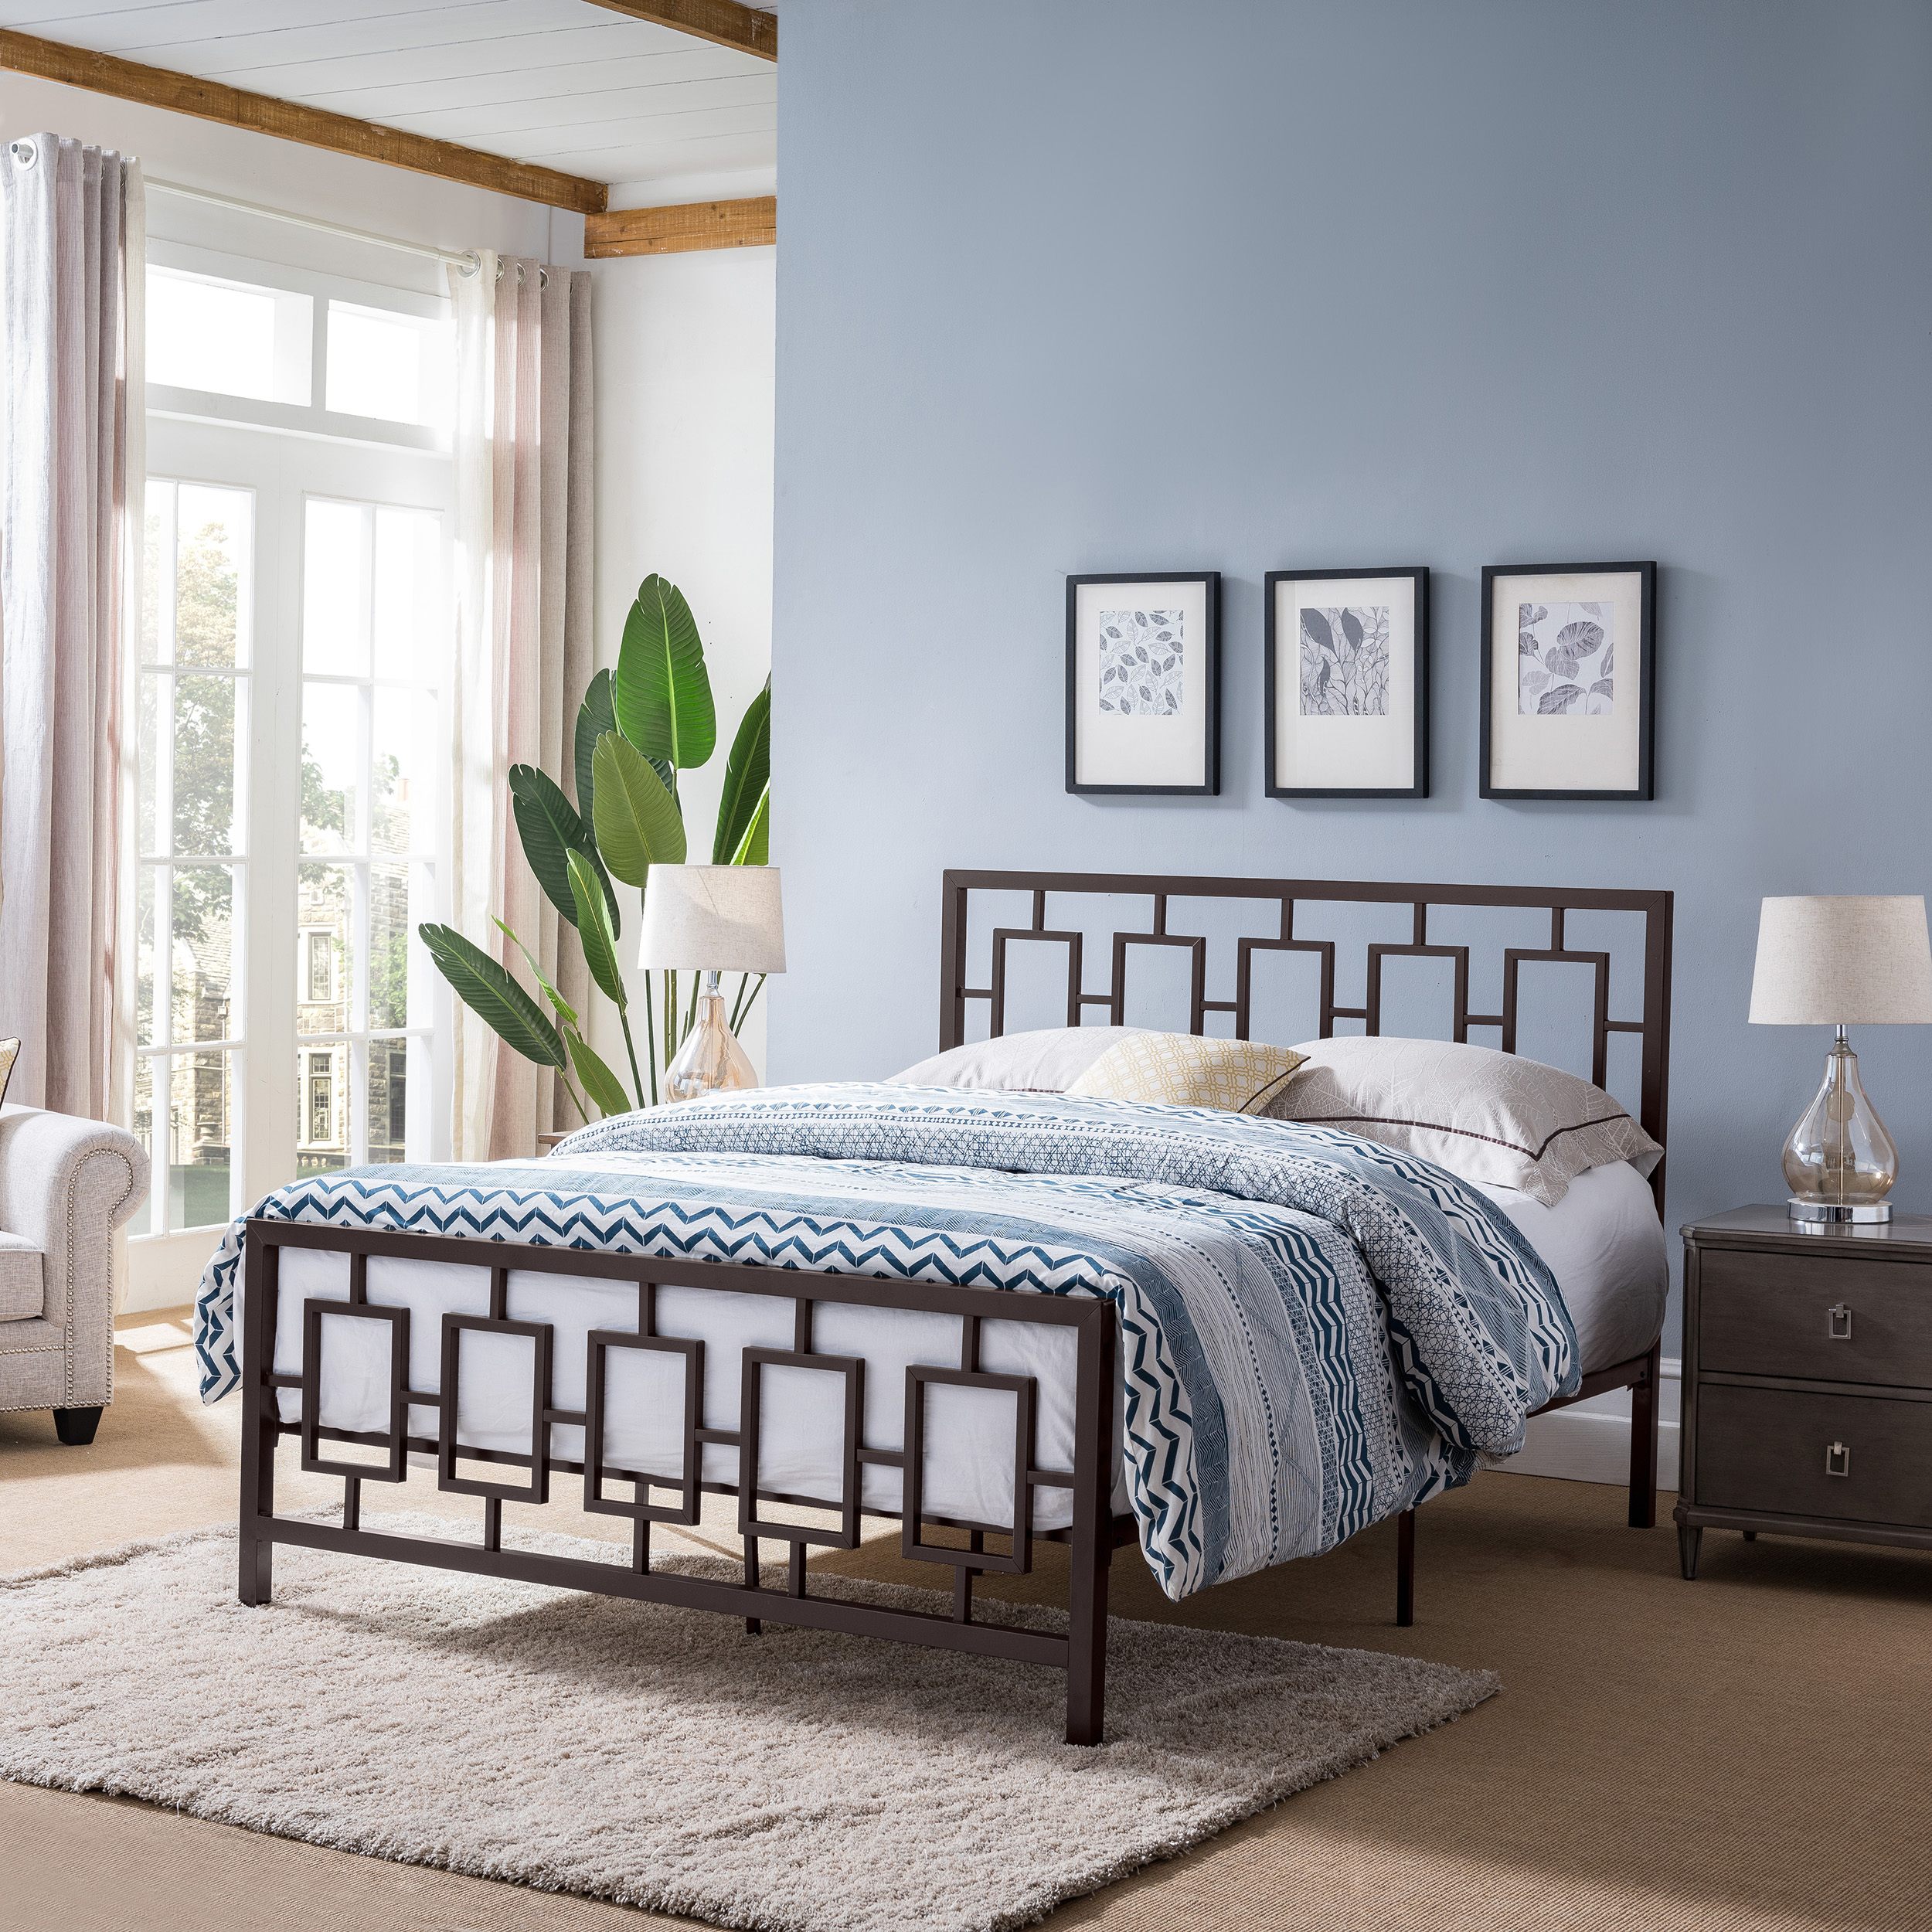 Noble House Krystin Modern Style Queen-Size Iron Bed Frame, Hammered Copper - image 1 of 10